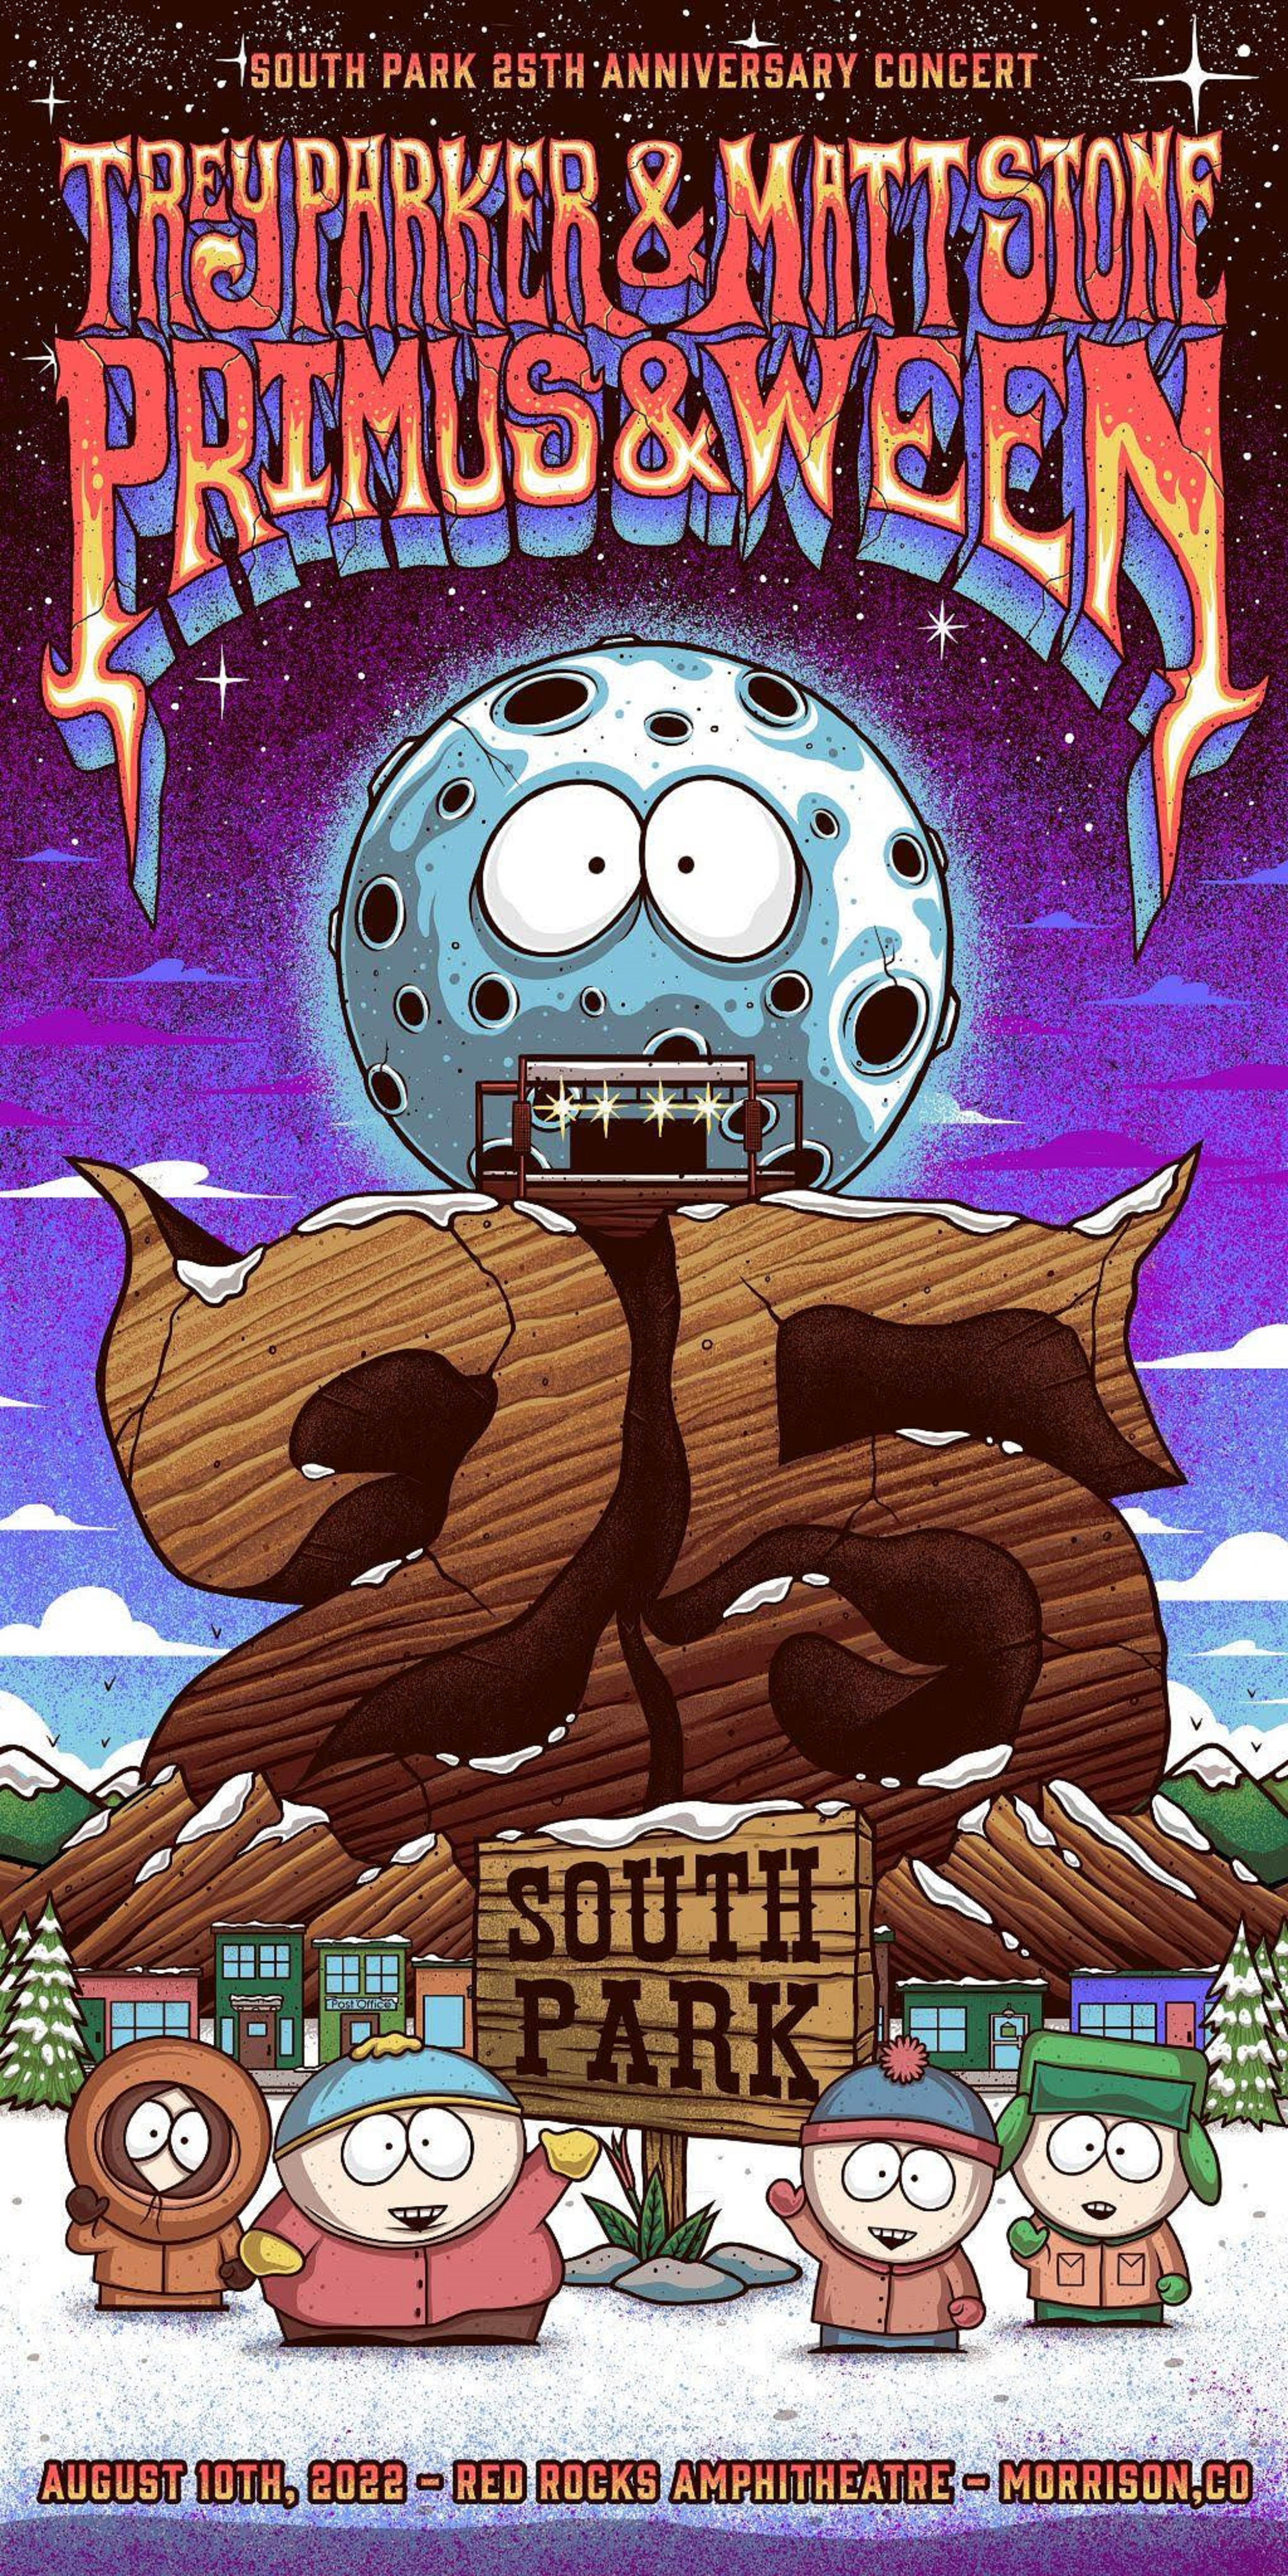 “South Park: The 25th Anniversary Concert” at Red Rocks Park and Amphitheatre with Trey Parker and Matt Stone, Primus and Ween